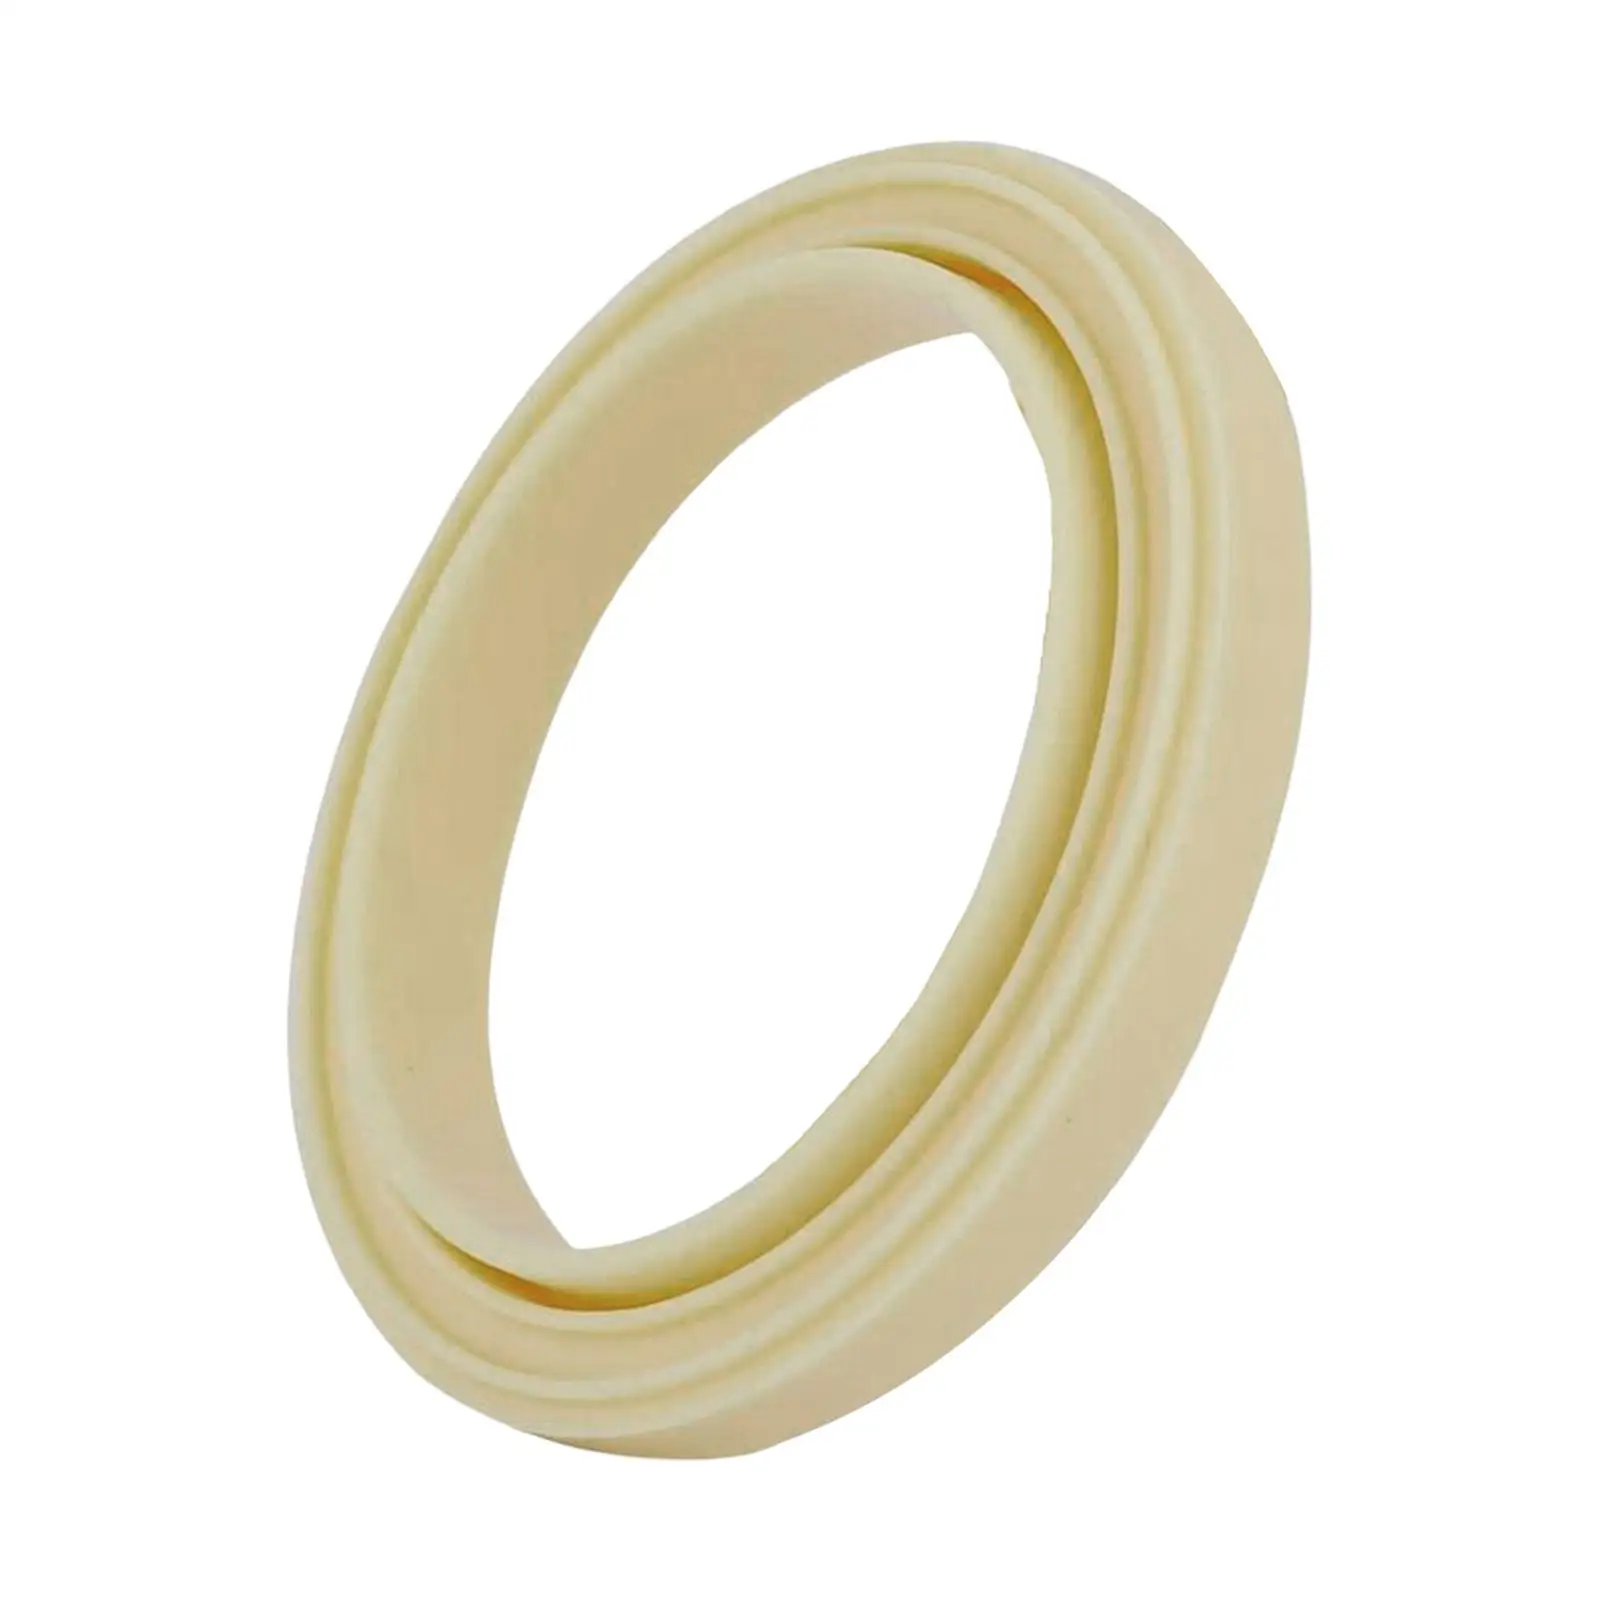 Silicone Steam Rings Replacement Parts Rrofessional Grouphead Gasket for 878 870 860 880 810 840 450 500 Coffee Maker Machine